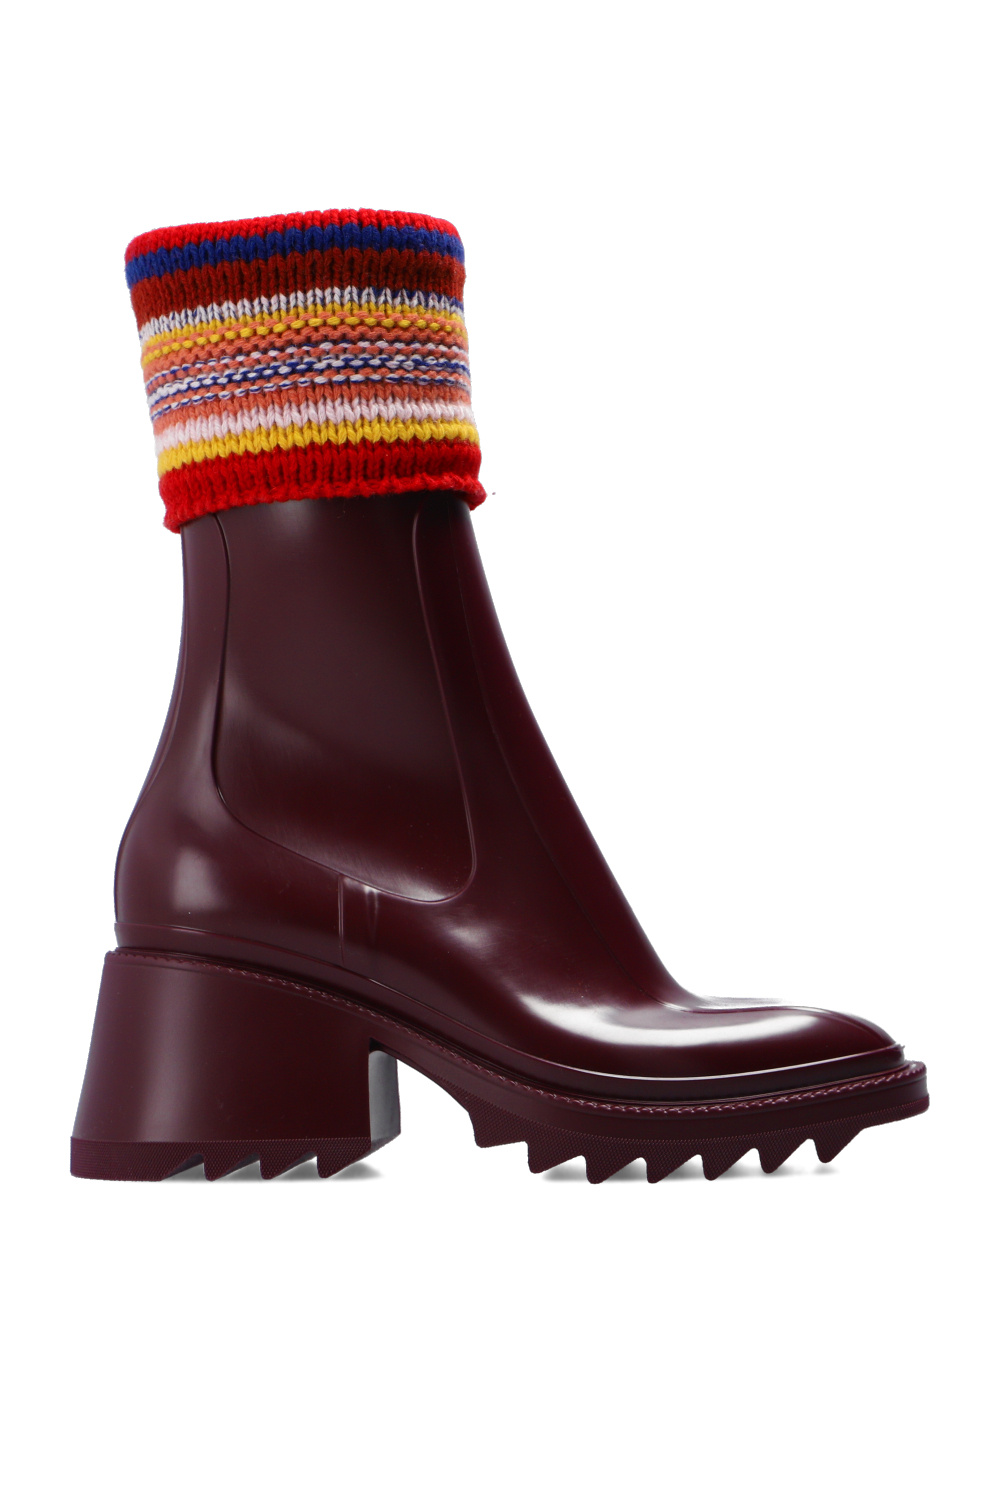 Chloé ‘Betty’ heeled ankle boots